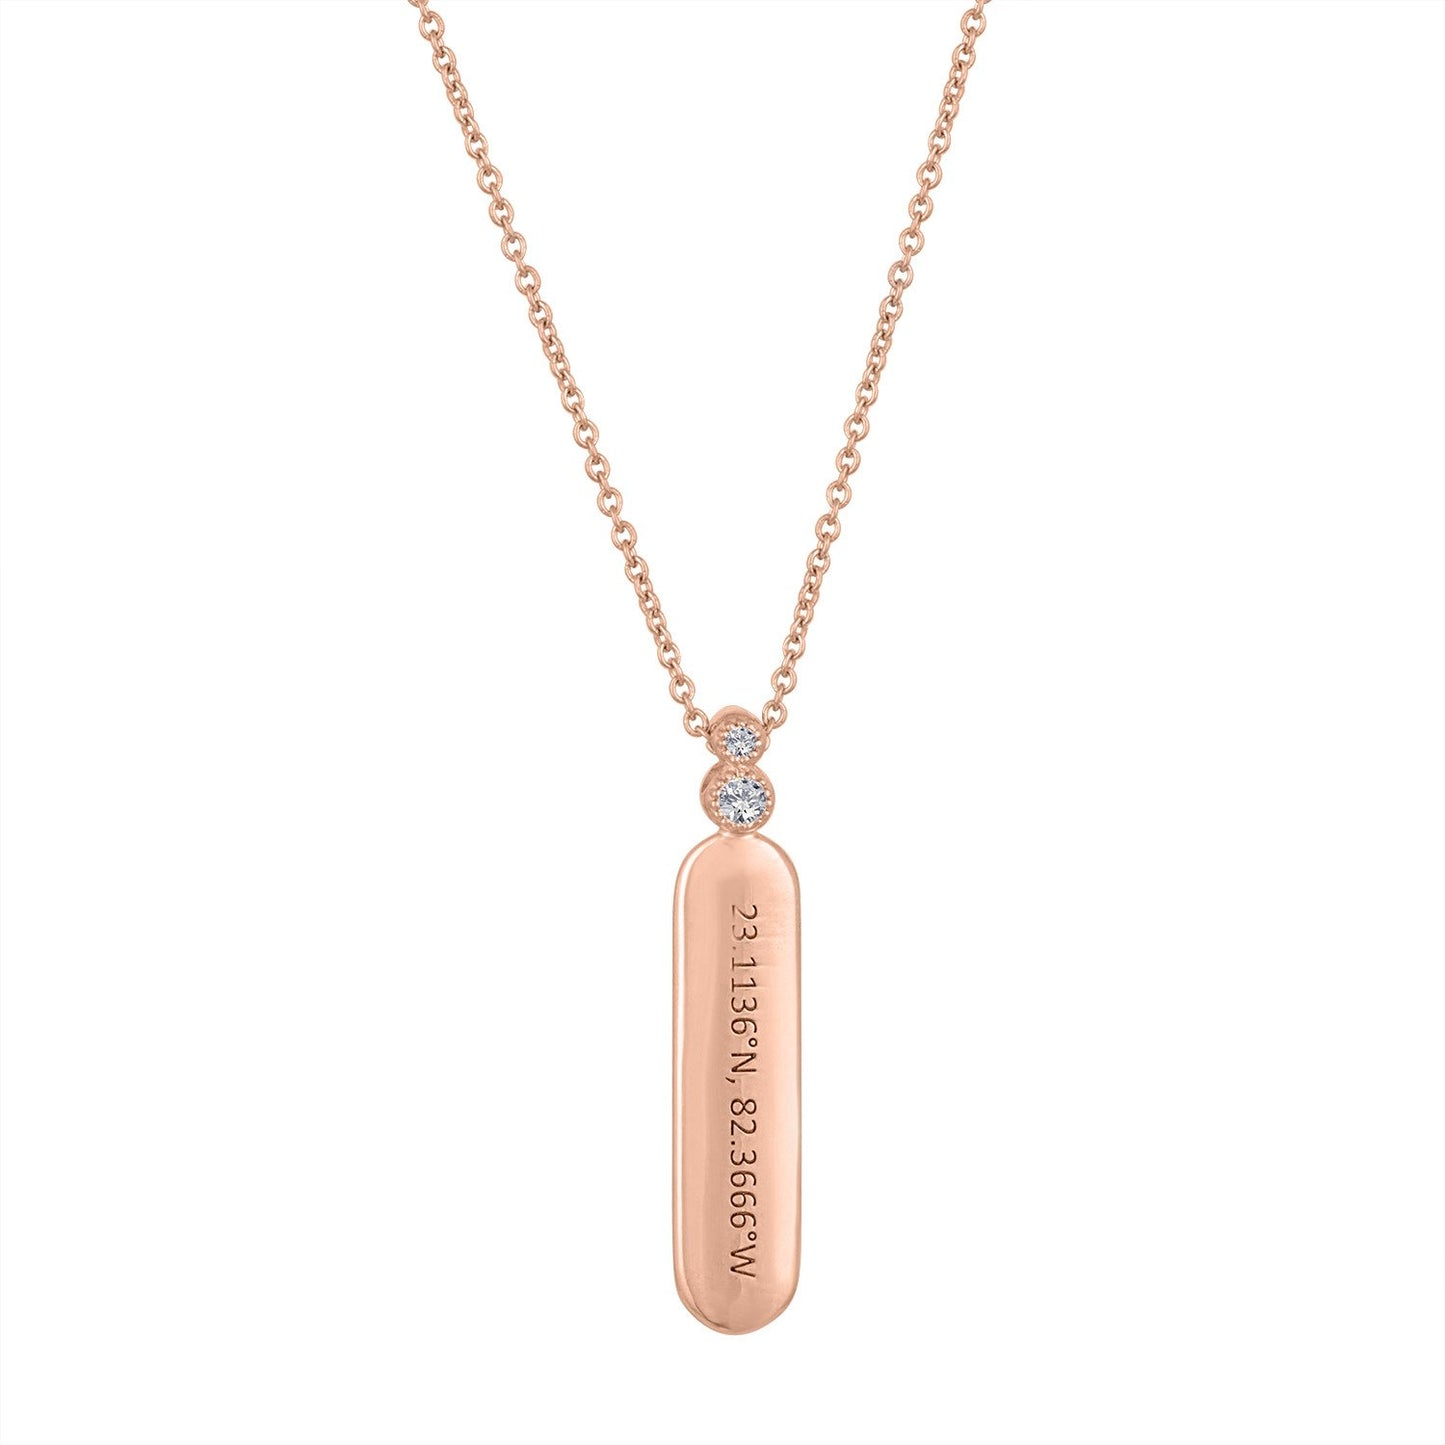 Rose gold skinny dog tag necklace with two round diamonds coordinates 